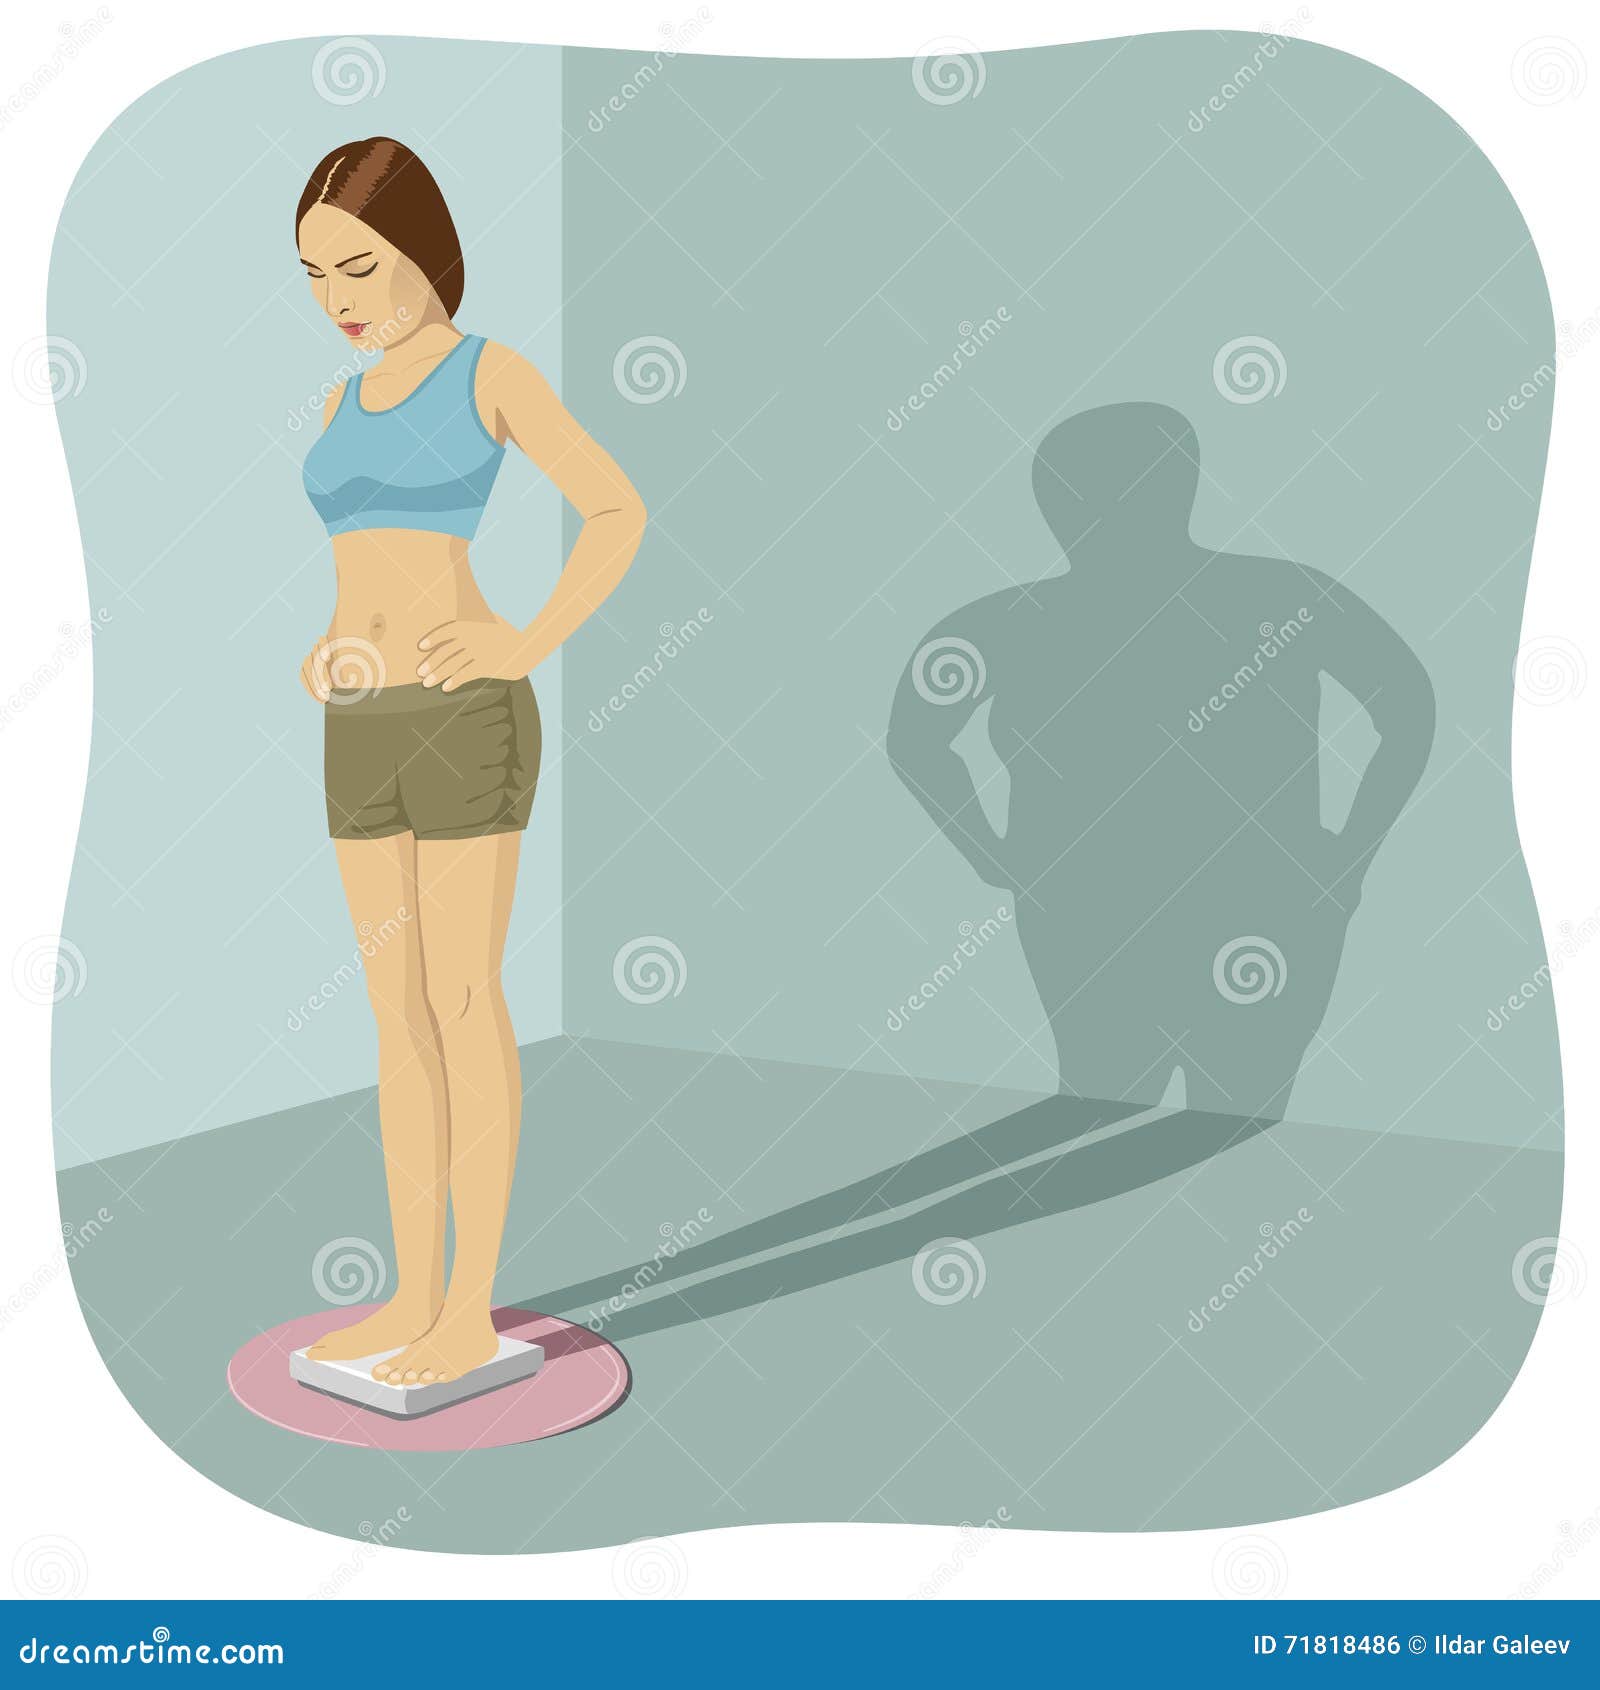 young woman standing on bathroom scale with her shadow shows her distorted body image